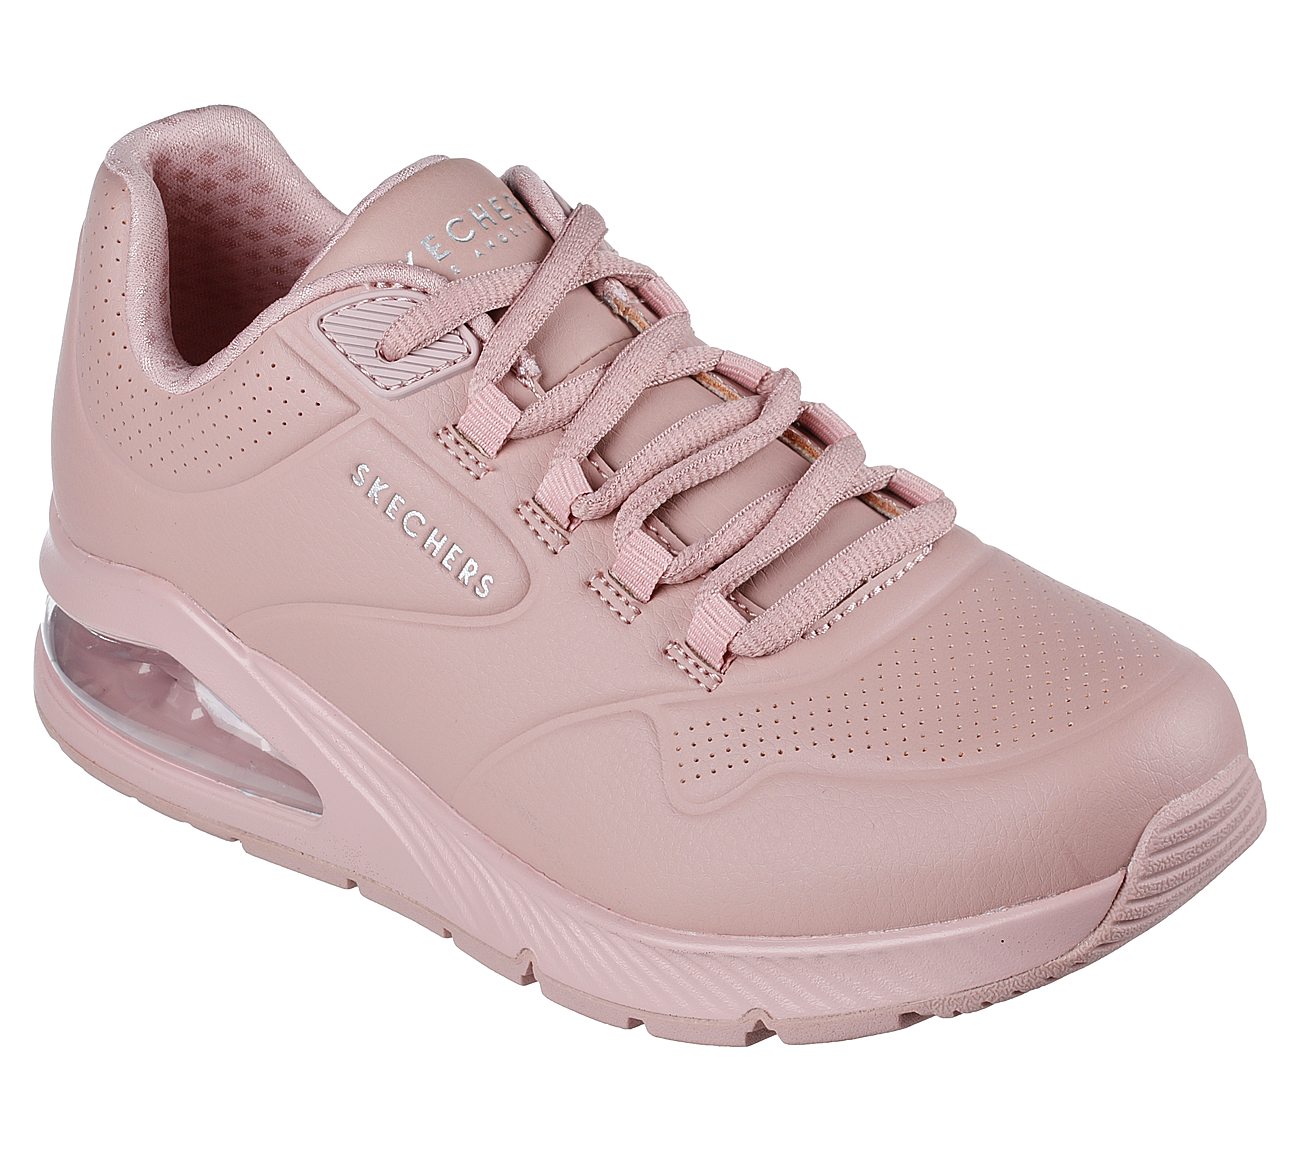 UNO 2 - AIR AROUND YOU, BLUSH Footwear Right View